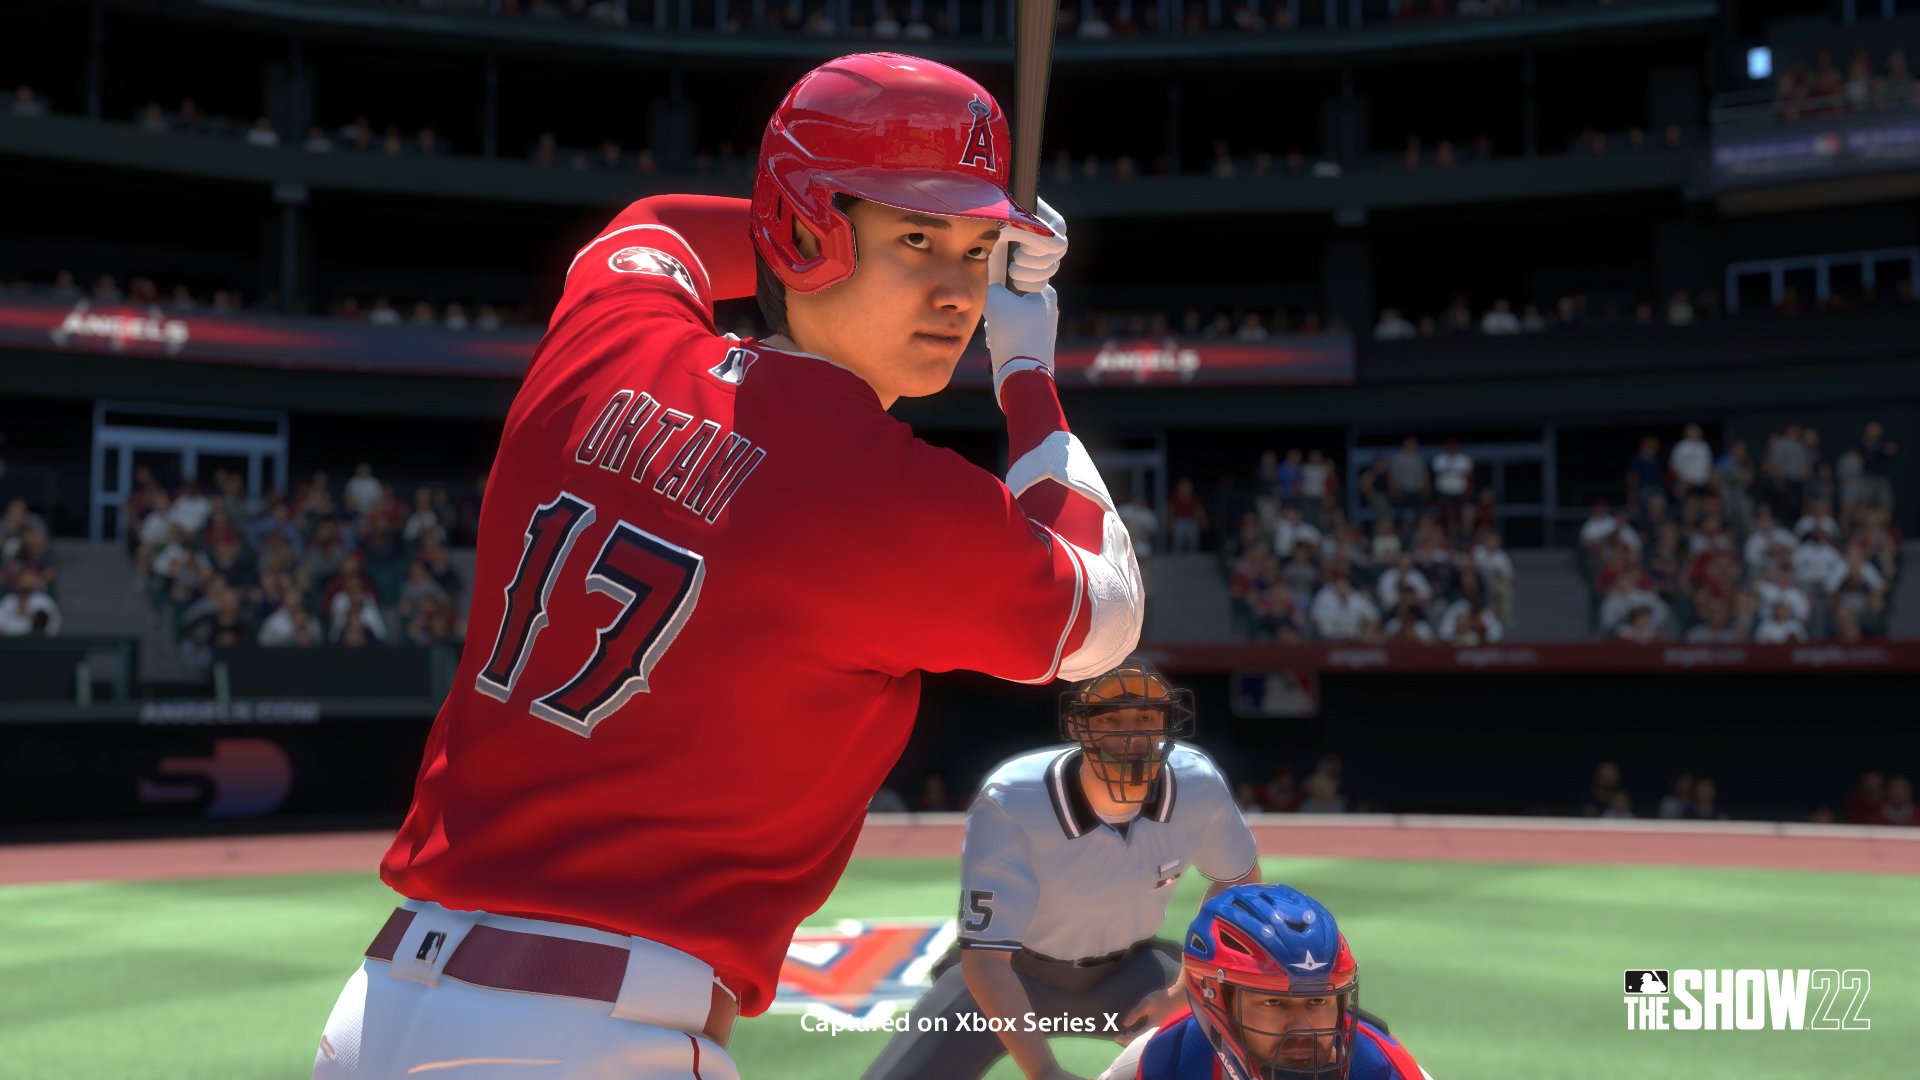 MLB The Show 22 - MVP Edition – April 1 - Optimized for Xbox Series X|S